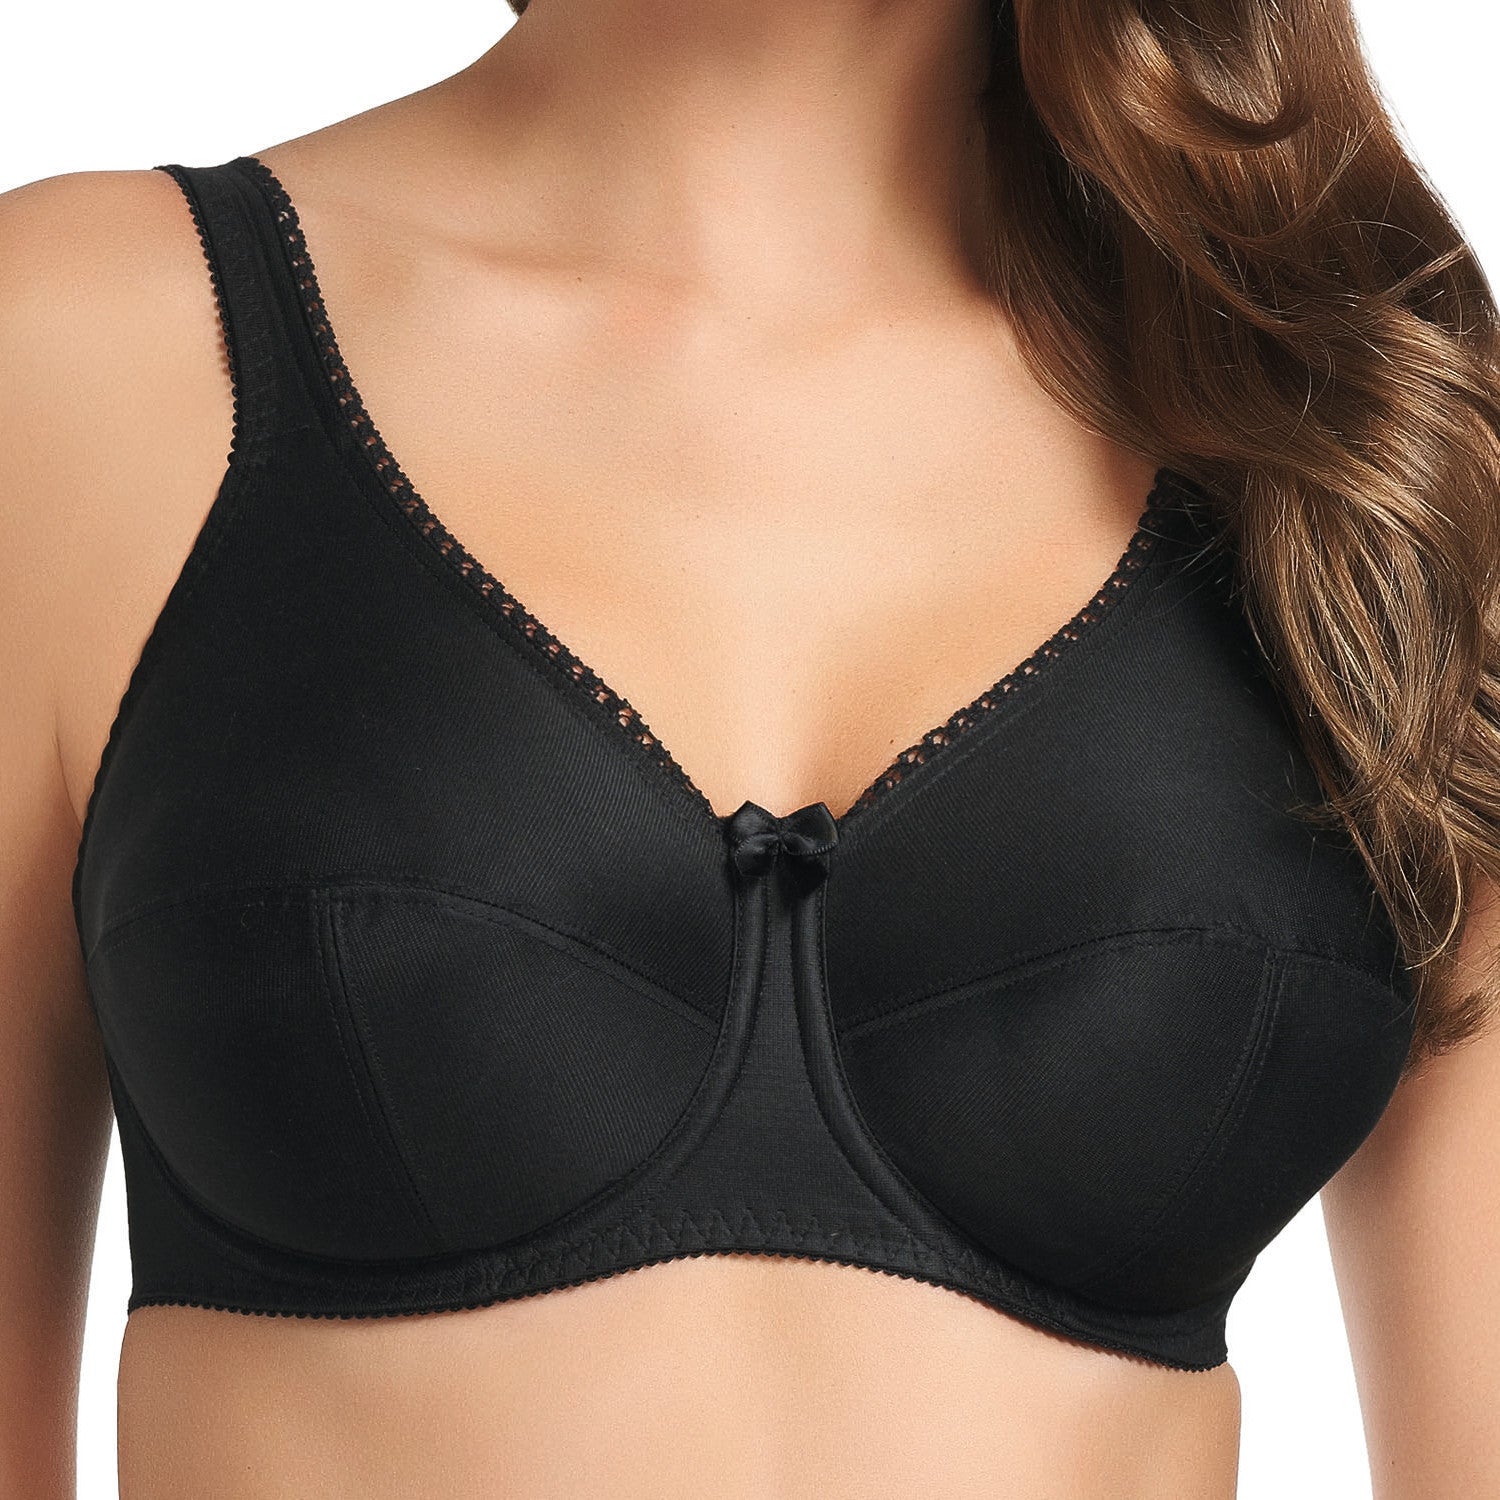 Fantasie Speciality Bra 6500 Womens Underwired Full Cup Cotton